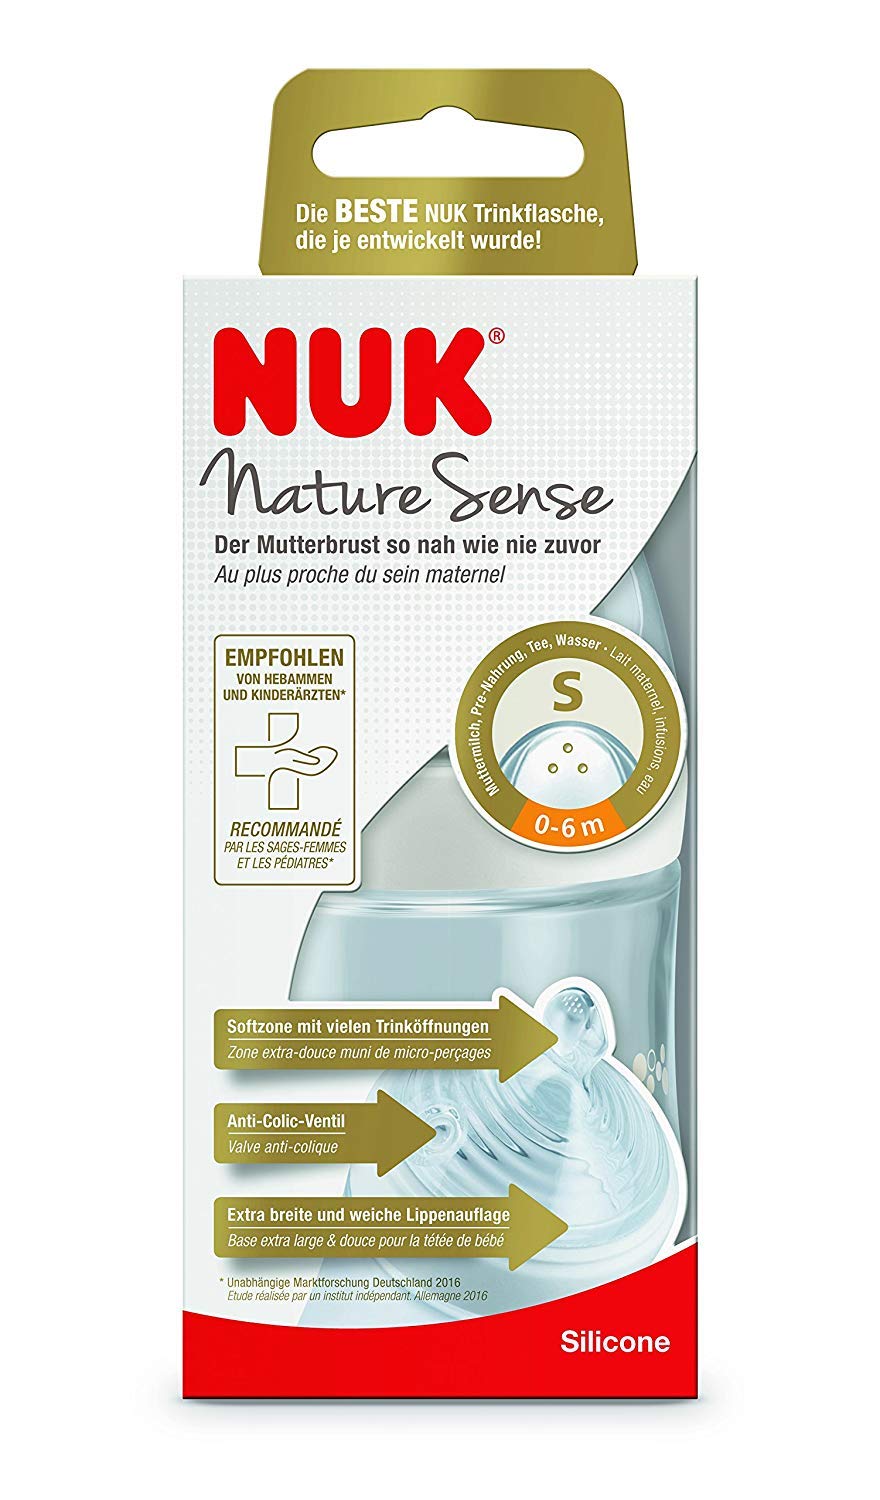 NUK Nature Sense Baby Bottle, 0-6 Months, S (Tea) with Breast-like Silicone Teat, BPA (Bisphenol-A) Free, 150 ml, White / Multicoloured, Pack of 1